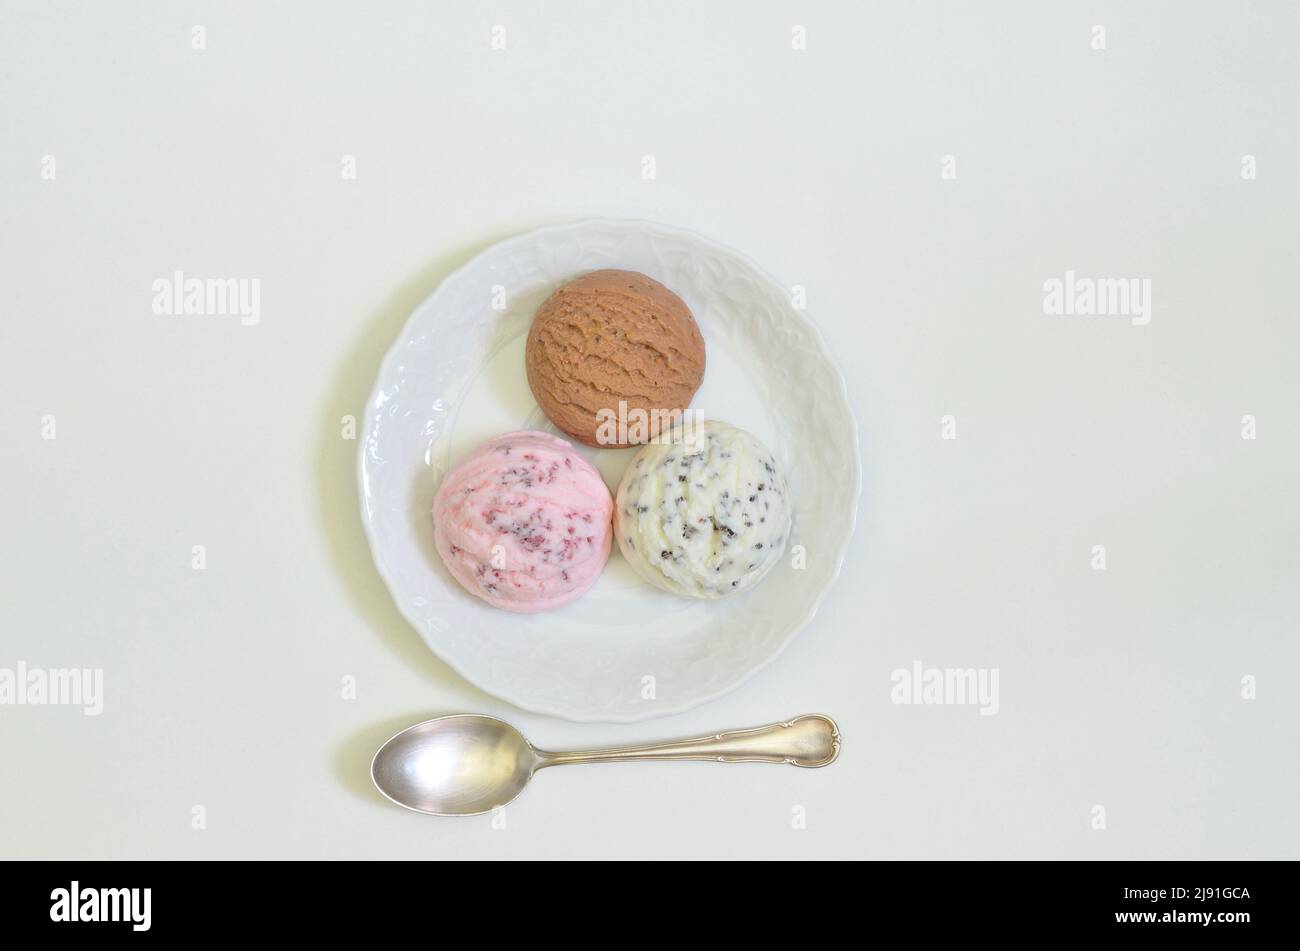 https://c8.alamy.com/comp/2J91GCA/top-view-of-three-scoops-of-vanilla-chocolate-and-strawberry-ice-cream-on-white-plate-with-spoon-white-background-with-space-for-text-2J91GCA.jpg